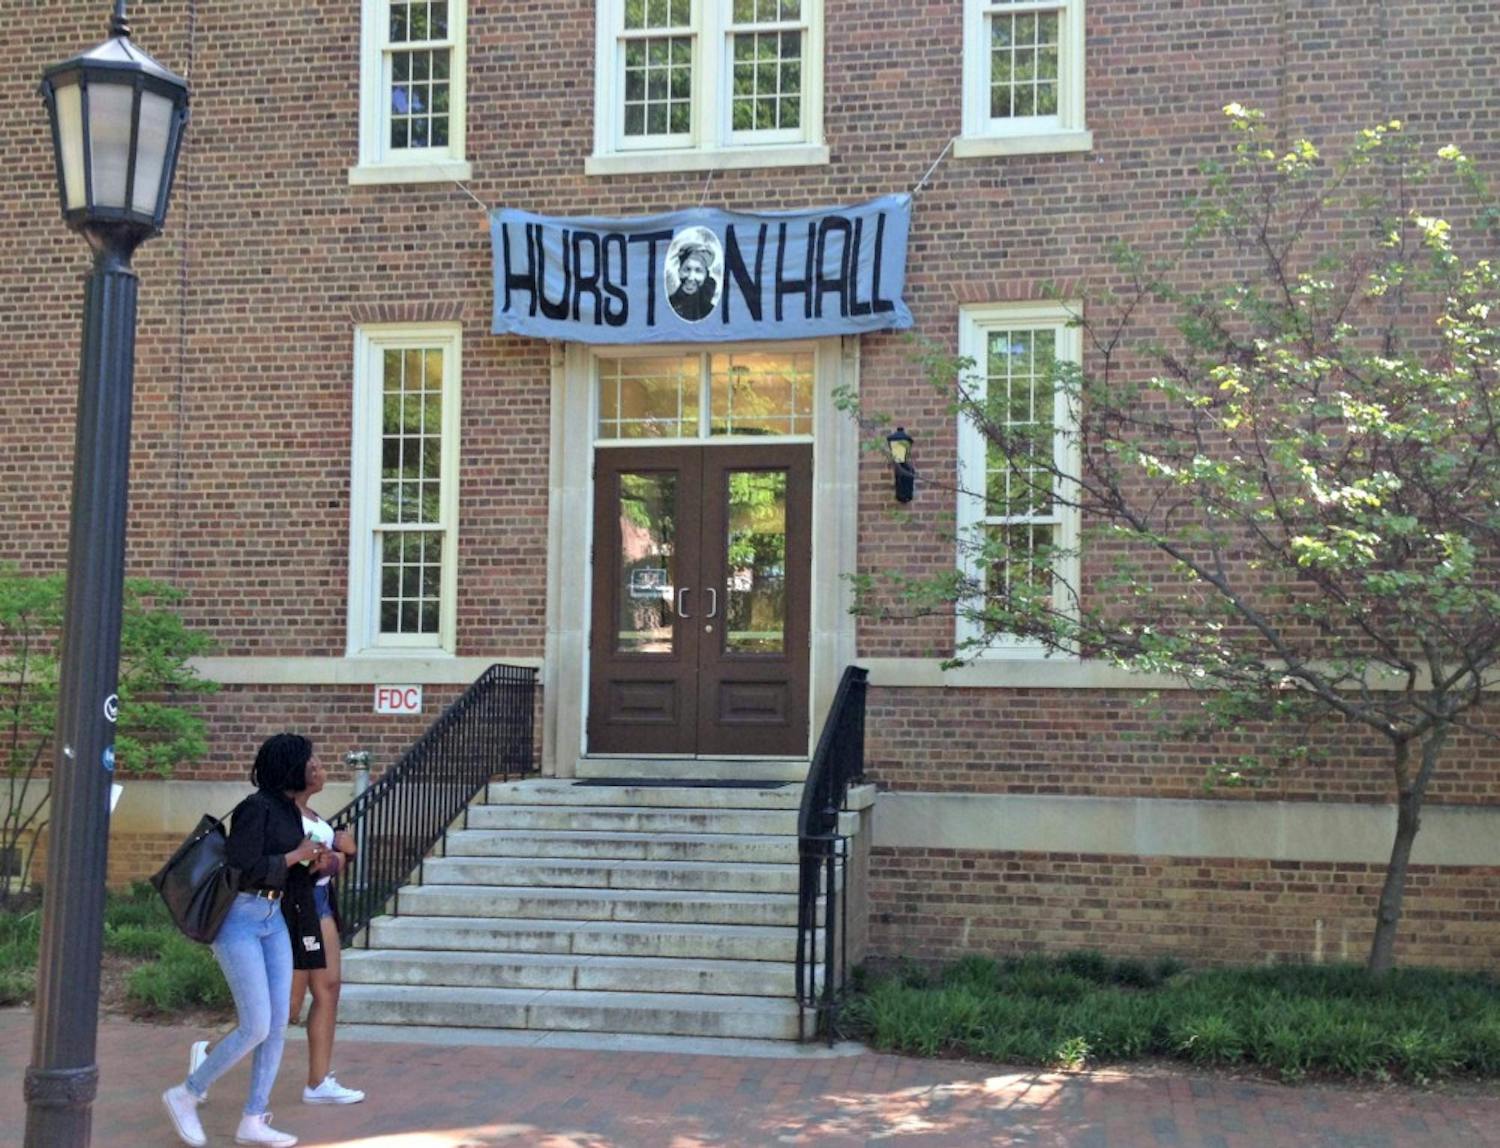 Student activists placed a banner reading "Hurston Hall" over the name&nbsp;plaque of Saunders Hall Friday, April 24, 2015. It has since been renamed "Carolina Hall."